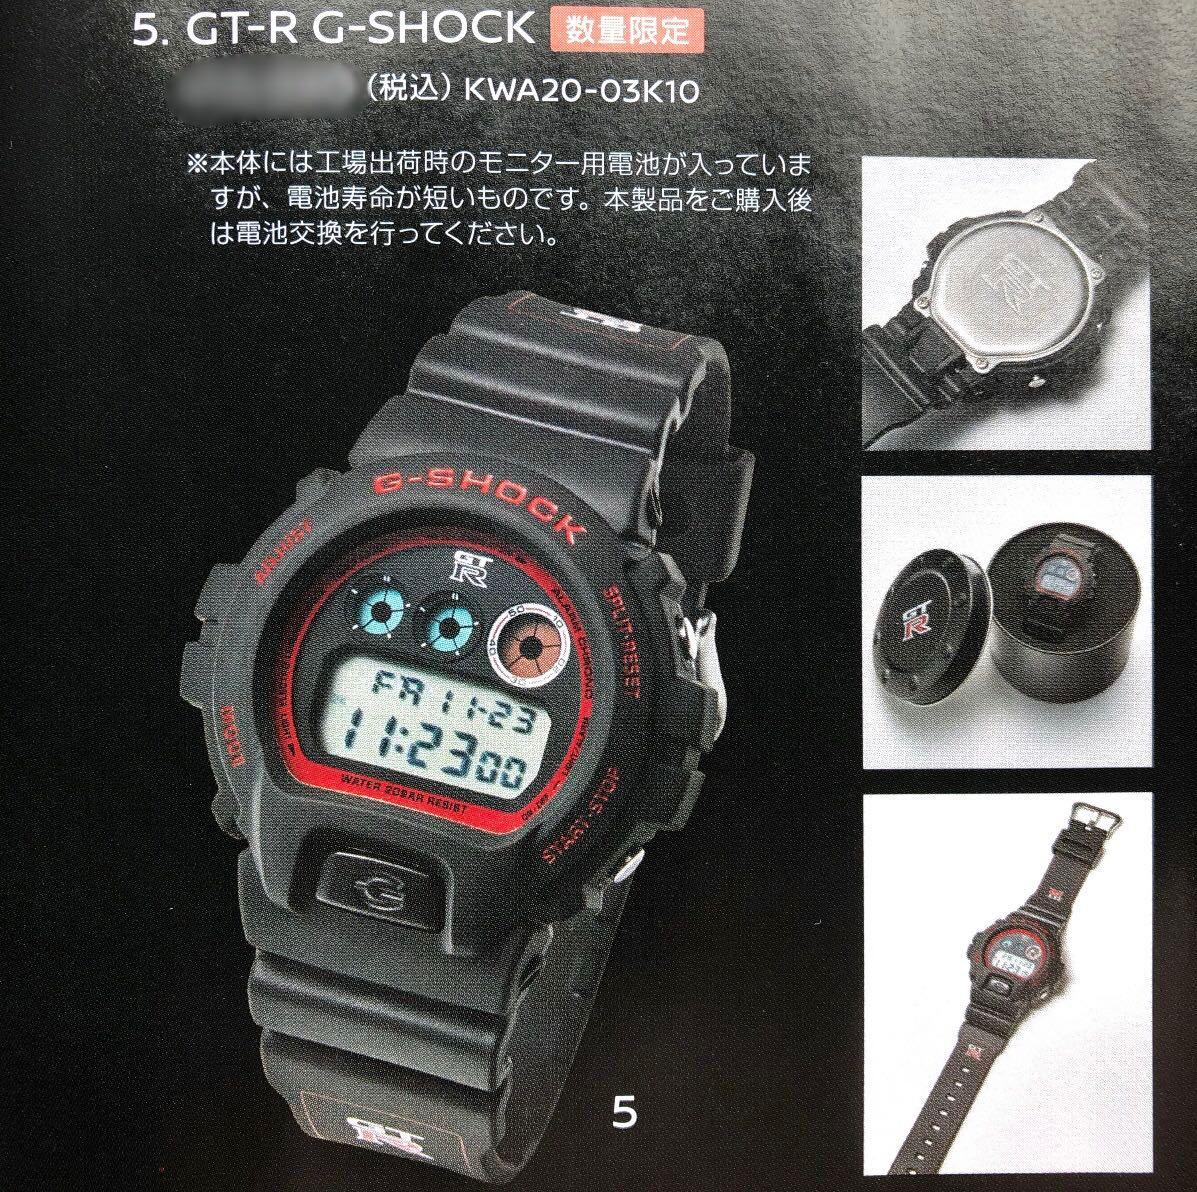 Gtr Gshock 18 Men S Fashion Watches On Carousell